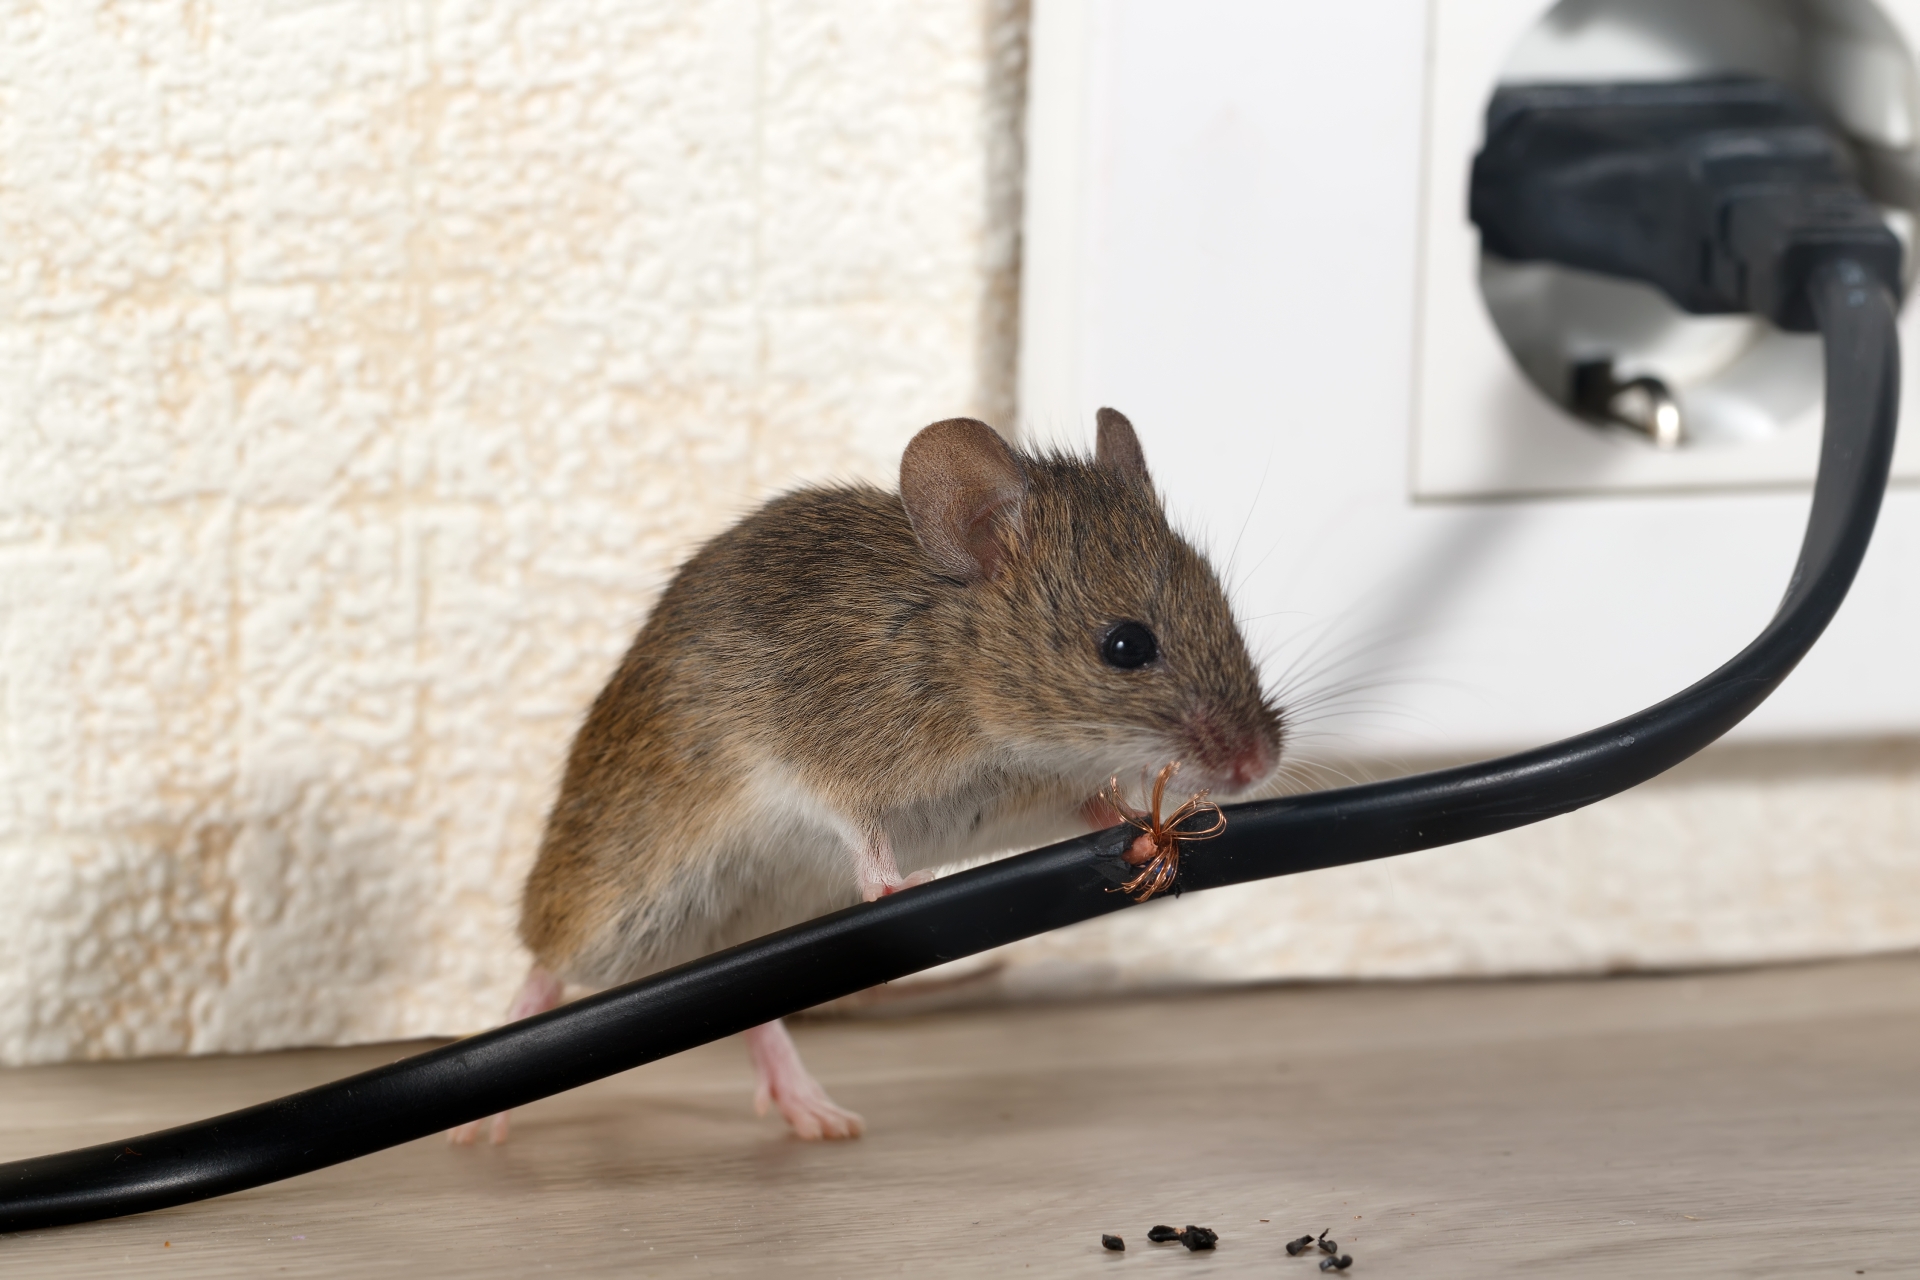 Mice Infestation, Pest Control in Palmers Green, N13. Call Now 020 8166 9746